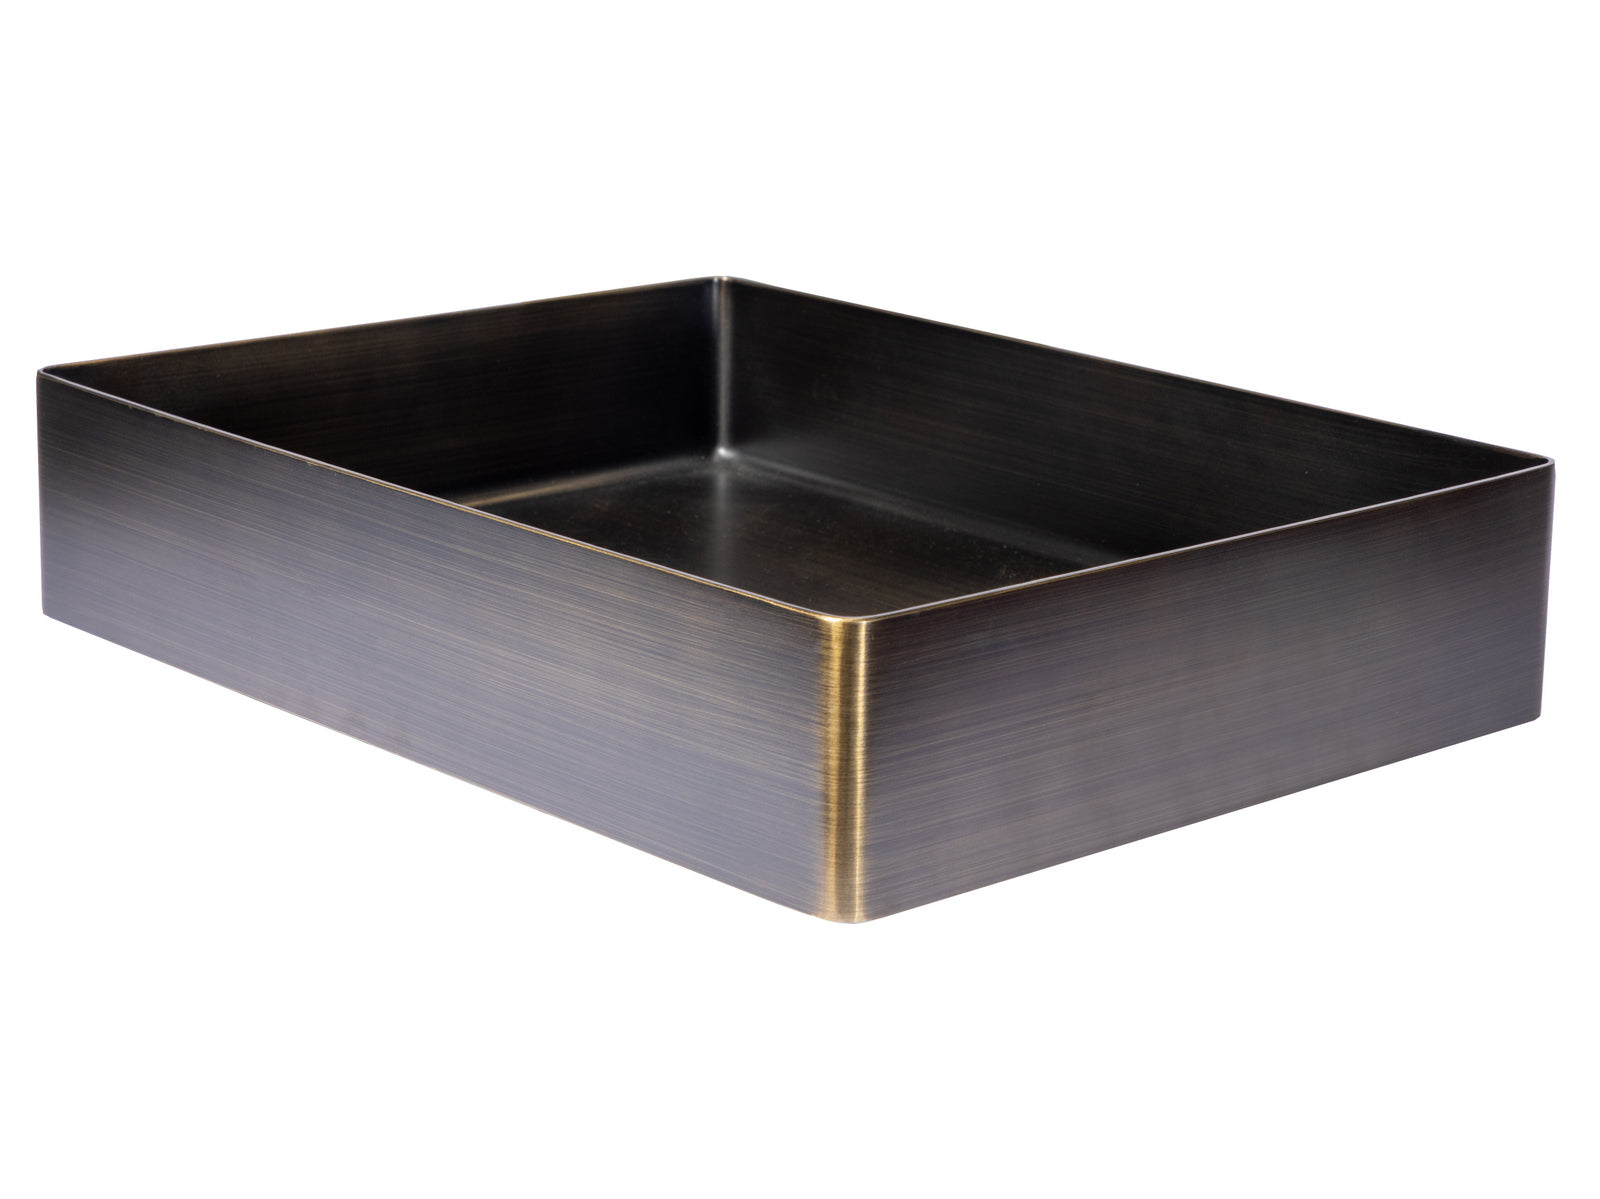 Rectangular 19" x 14 1/2" Stainless Steel Bathroom Vessel Sink with Drain in Antique Gold